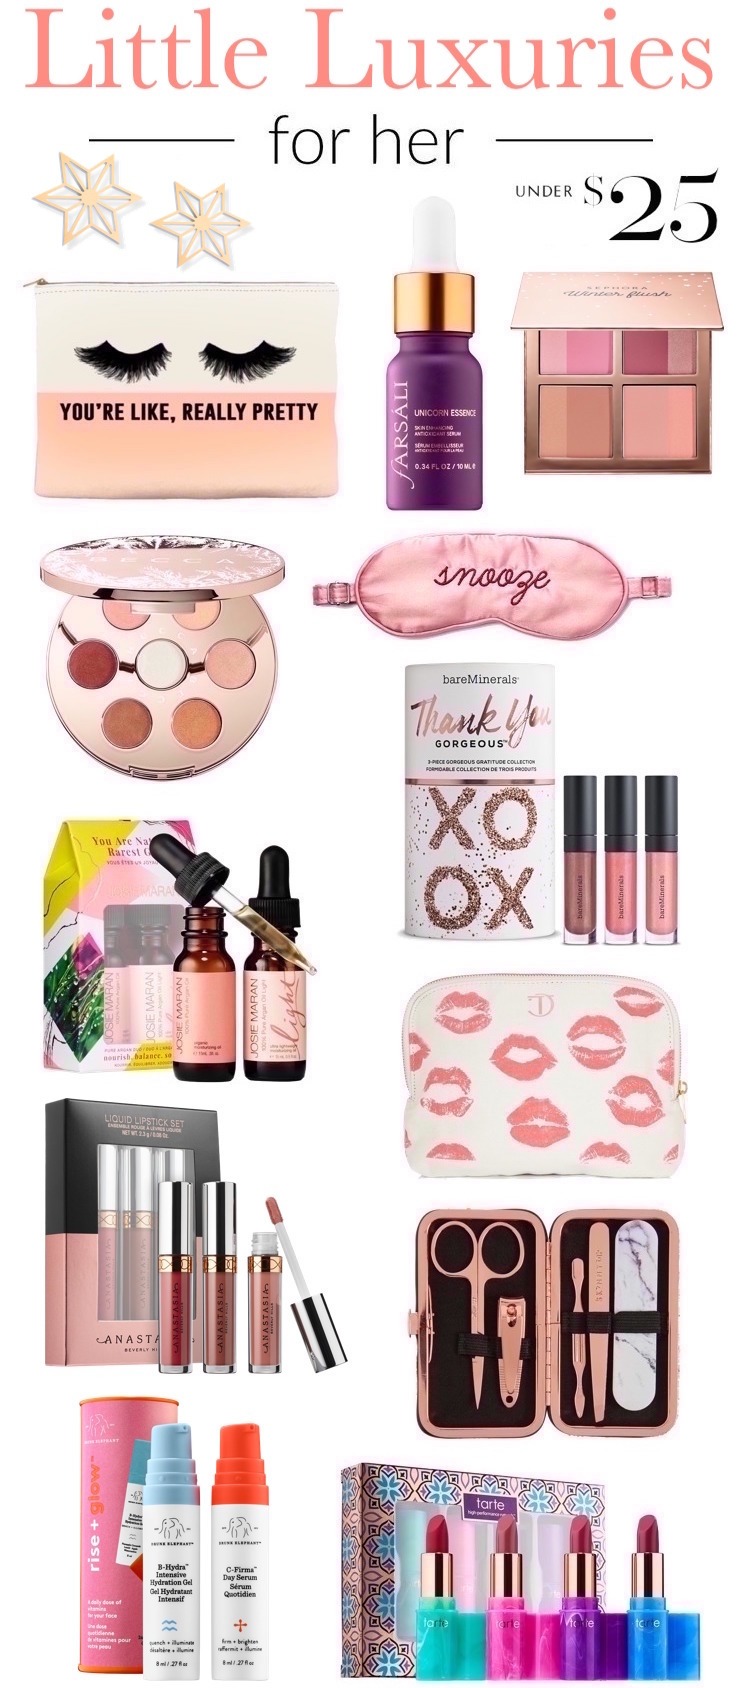 Holiday beauty and makeup gift ideas for friends | Whether you are shopping for your favorite ladies or want to spoil yourself, these beauty gifts under $25 are sure to impress the beauty obsessed! 